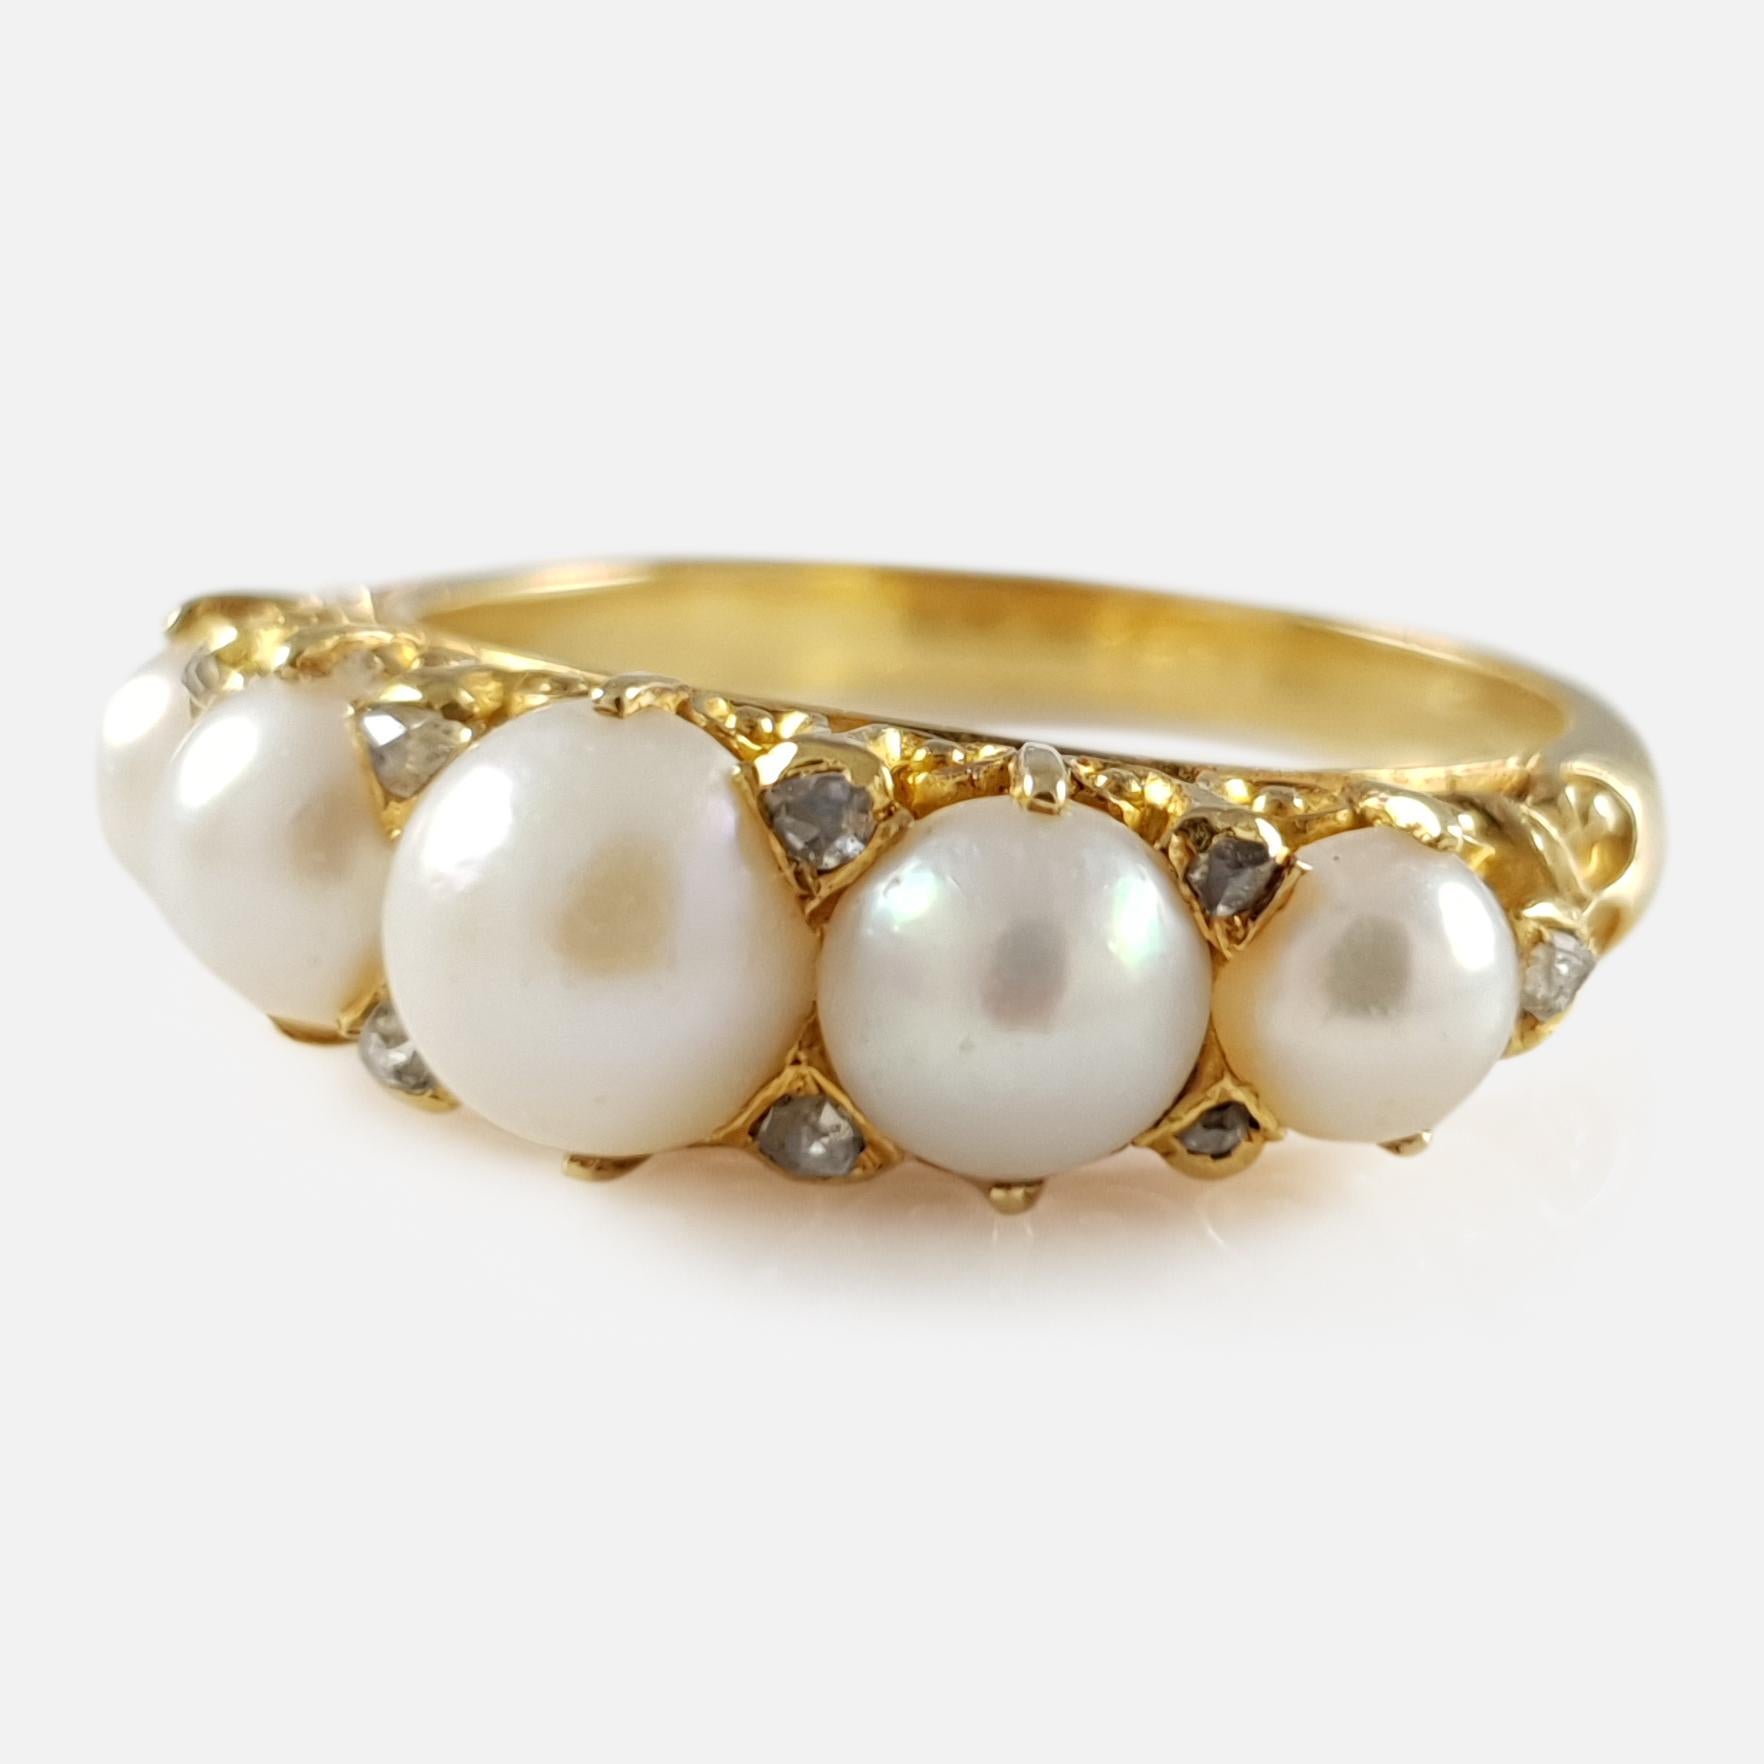 Antique Victorian 18 Karat Yellow Gold Pearl and Diamond Ring 4